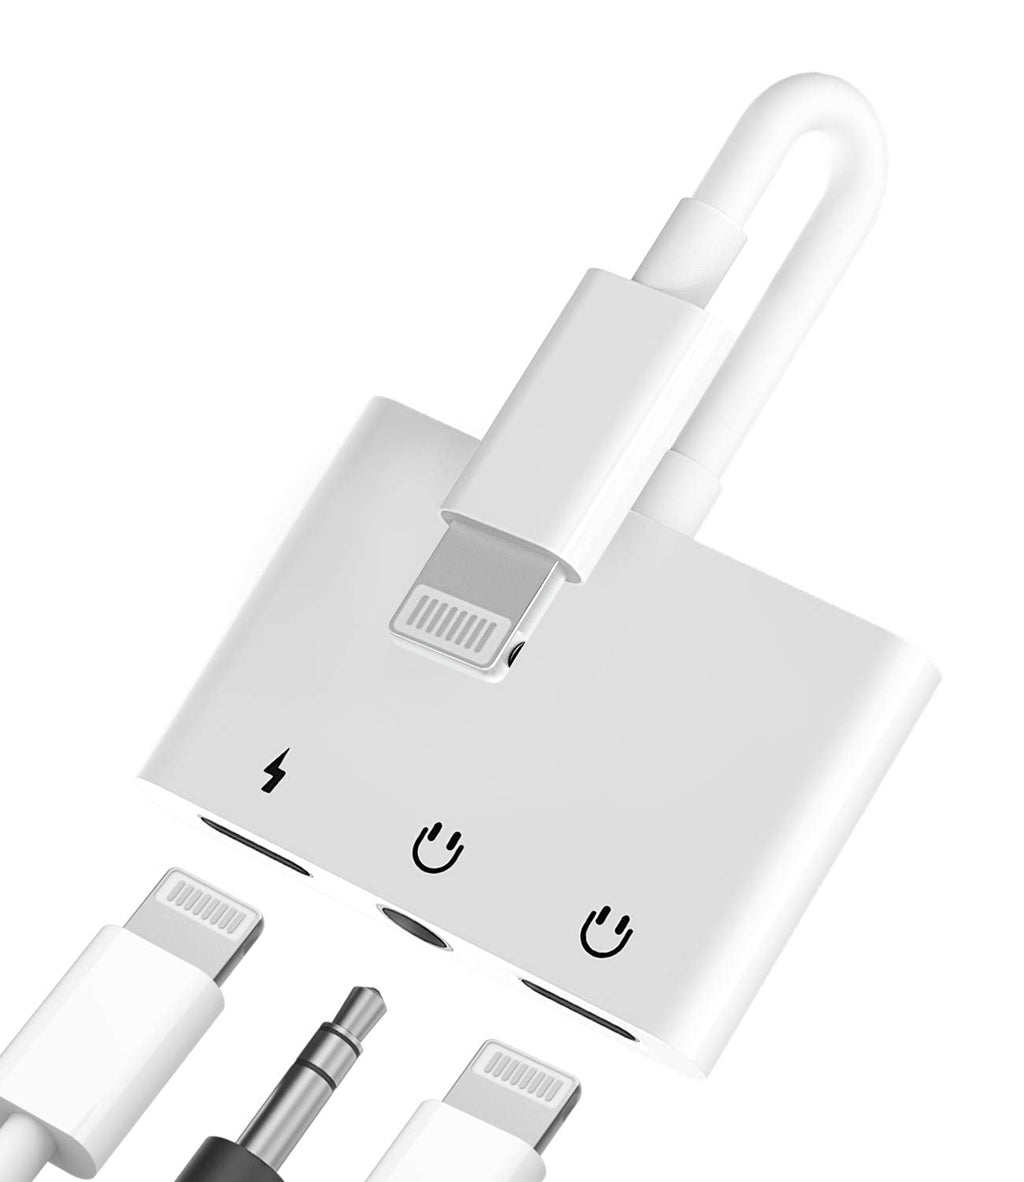  [AUSTRALIA] - Headphone Adapter Lightning to 3.5mm AUX Audio Jack and Charger Extender Dongle Earphone Headset Splitter Compatible with iPhone 11 12 Mini pro max xs xr x se2 7 8 Plus for Ipad Air Cable Converter